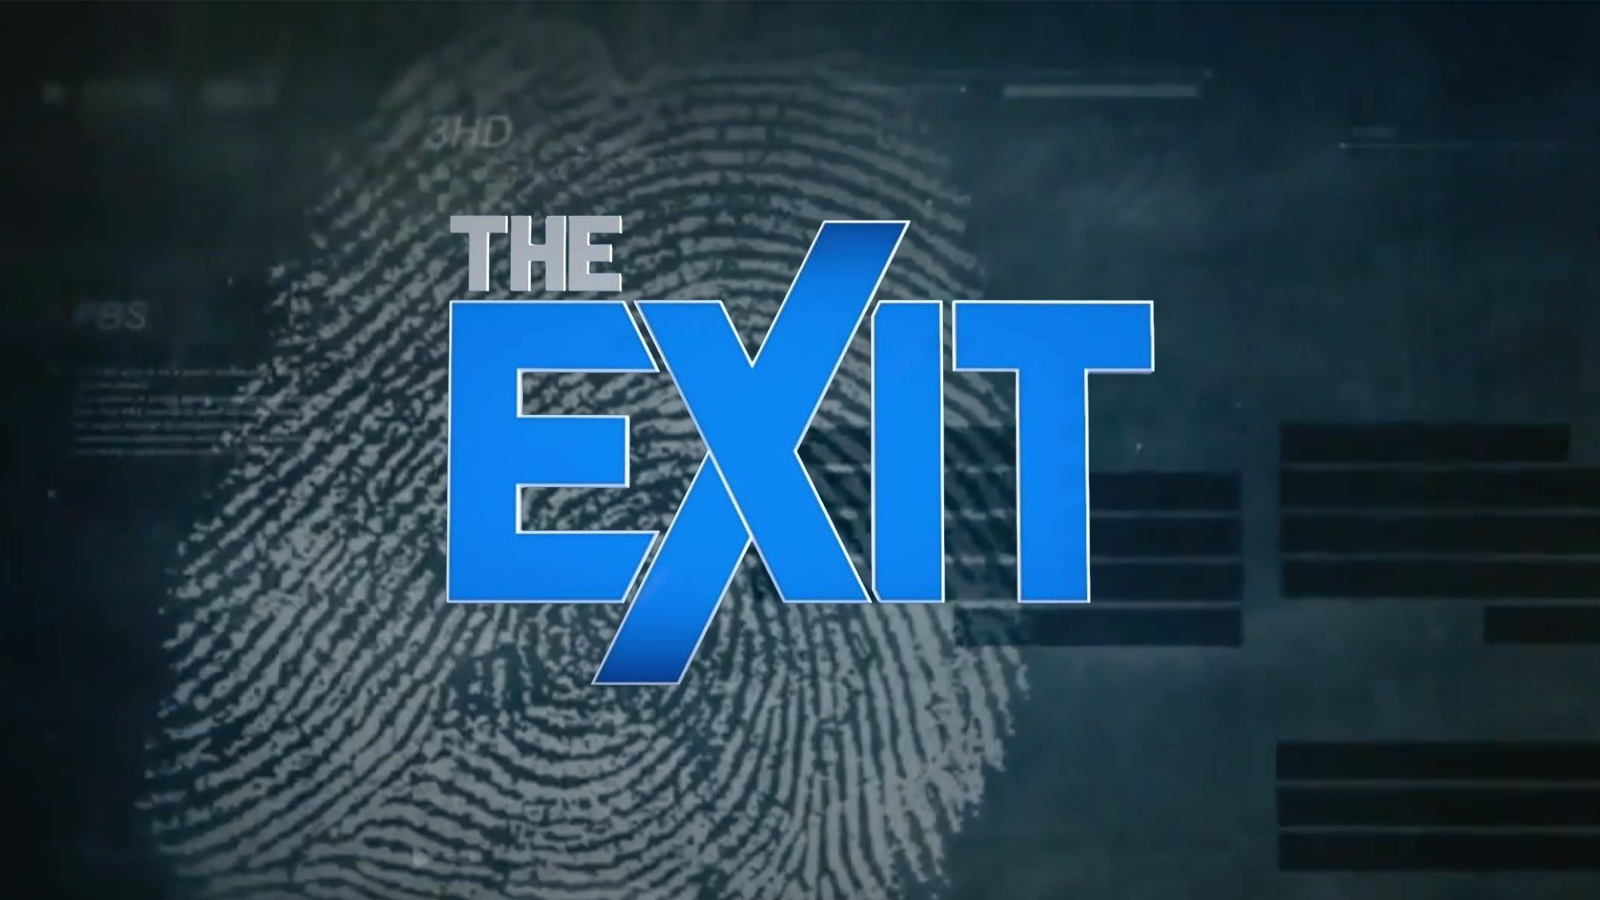 The EXIT